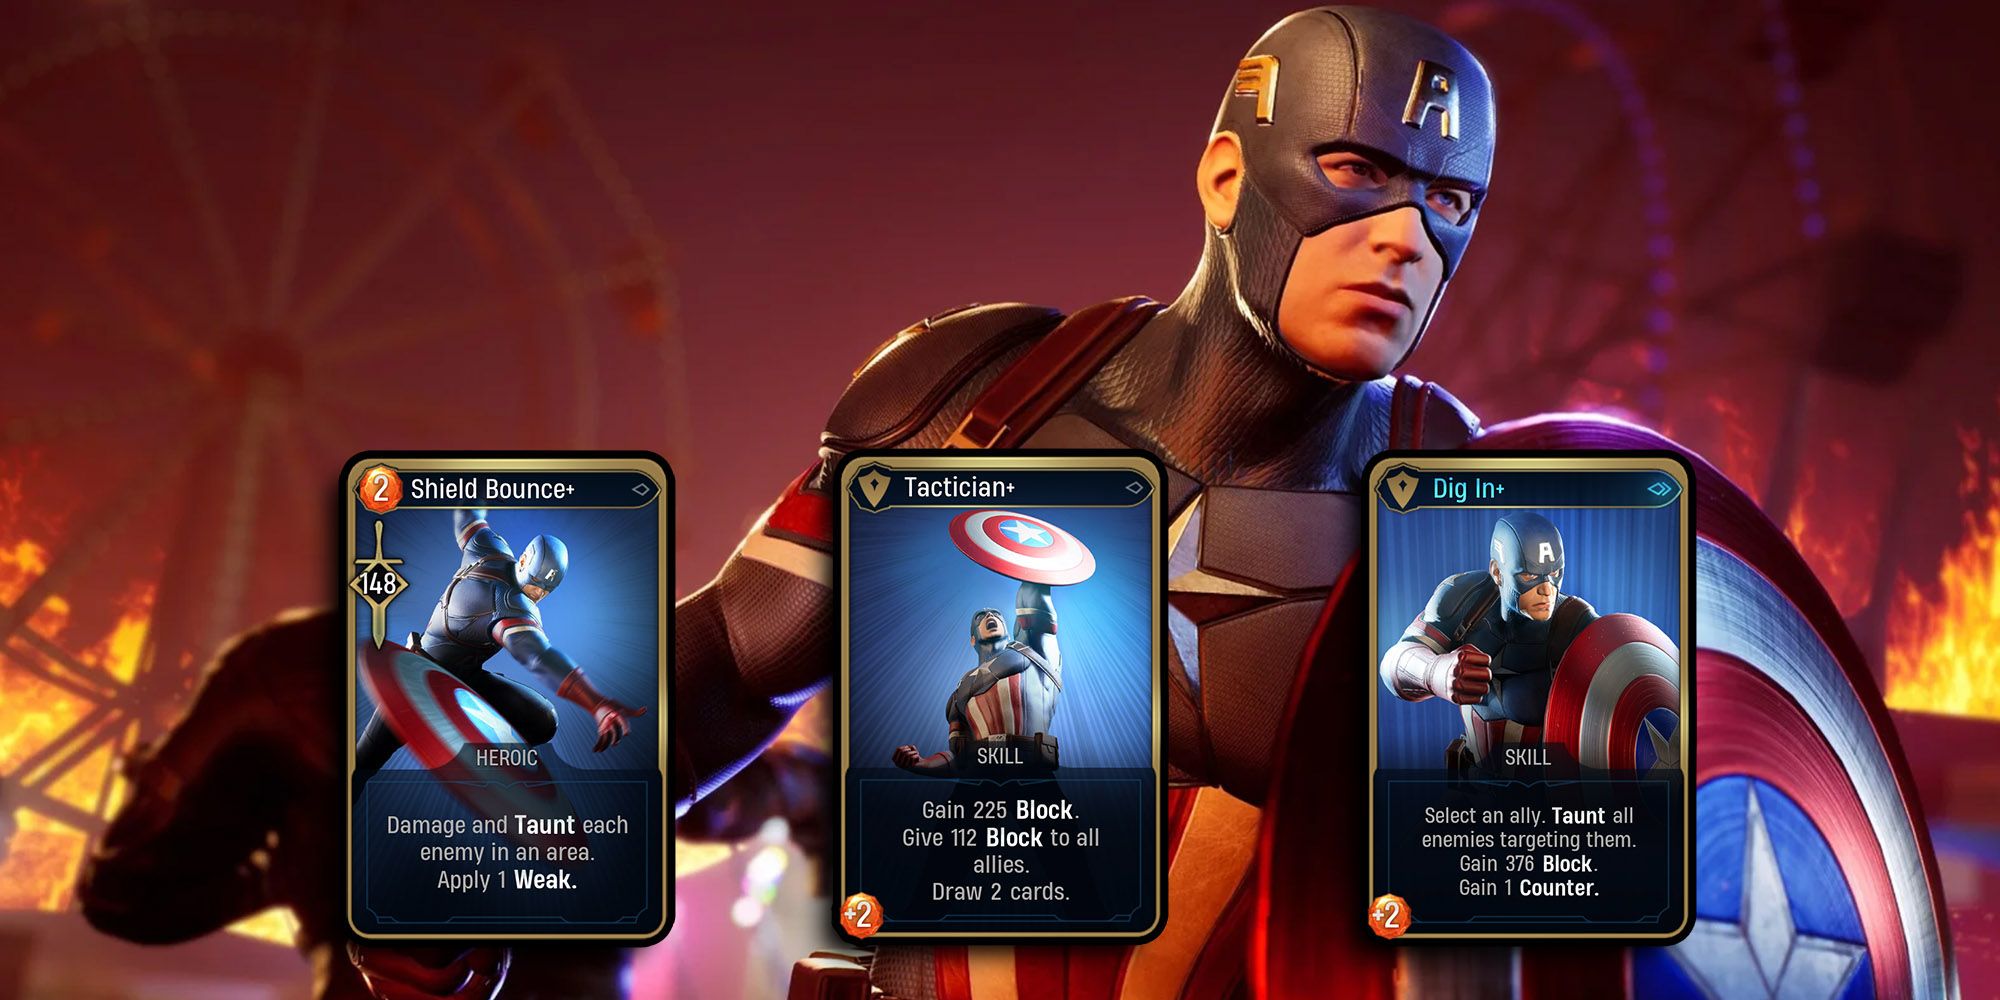 Marvel Midnight Suns - Captain America's Best Card Upgrades Over Image Of Cap Looking Off Camera In-Game